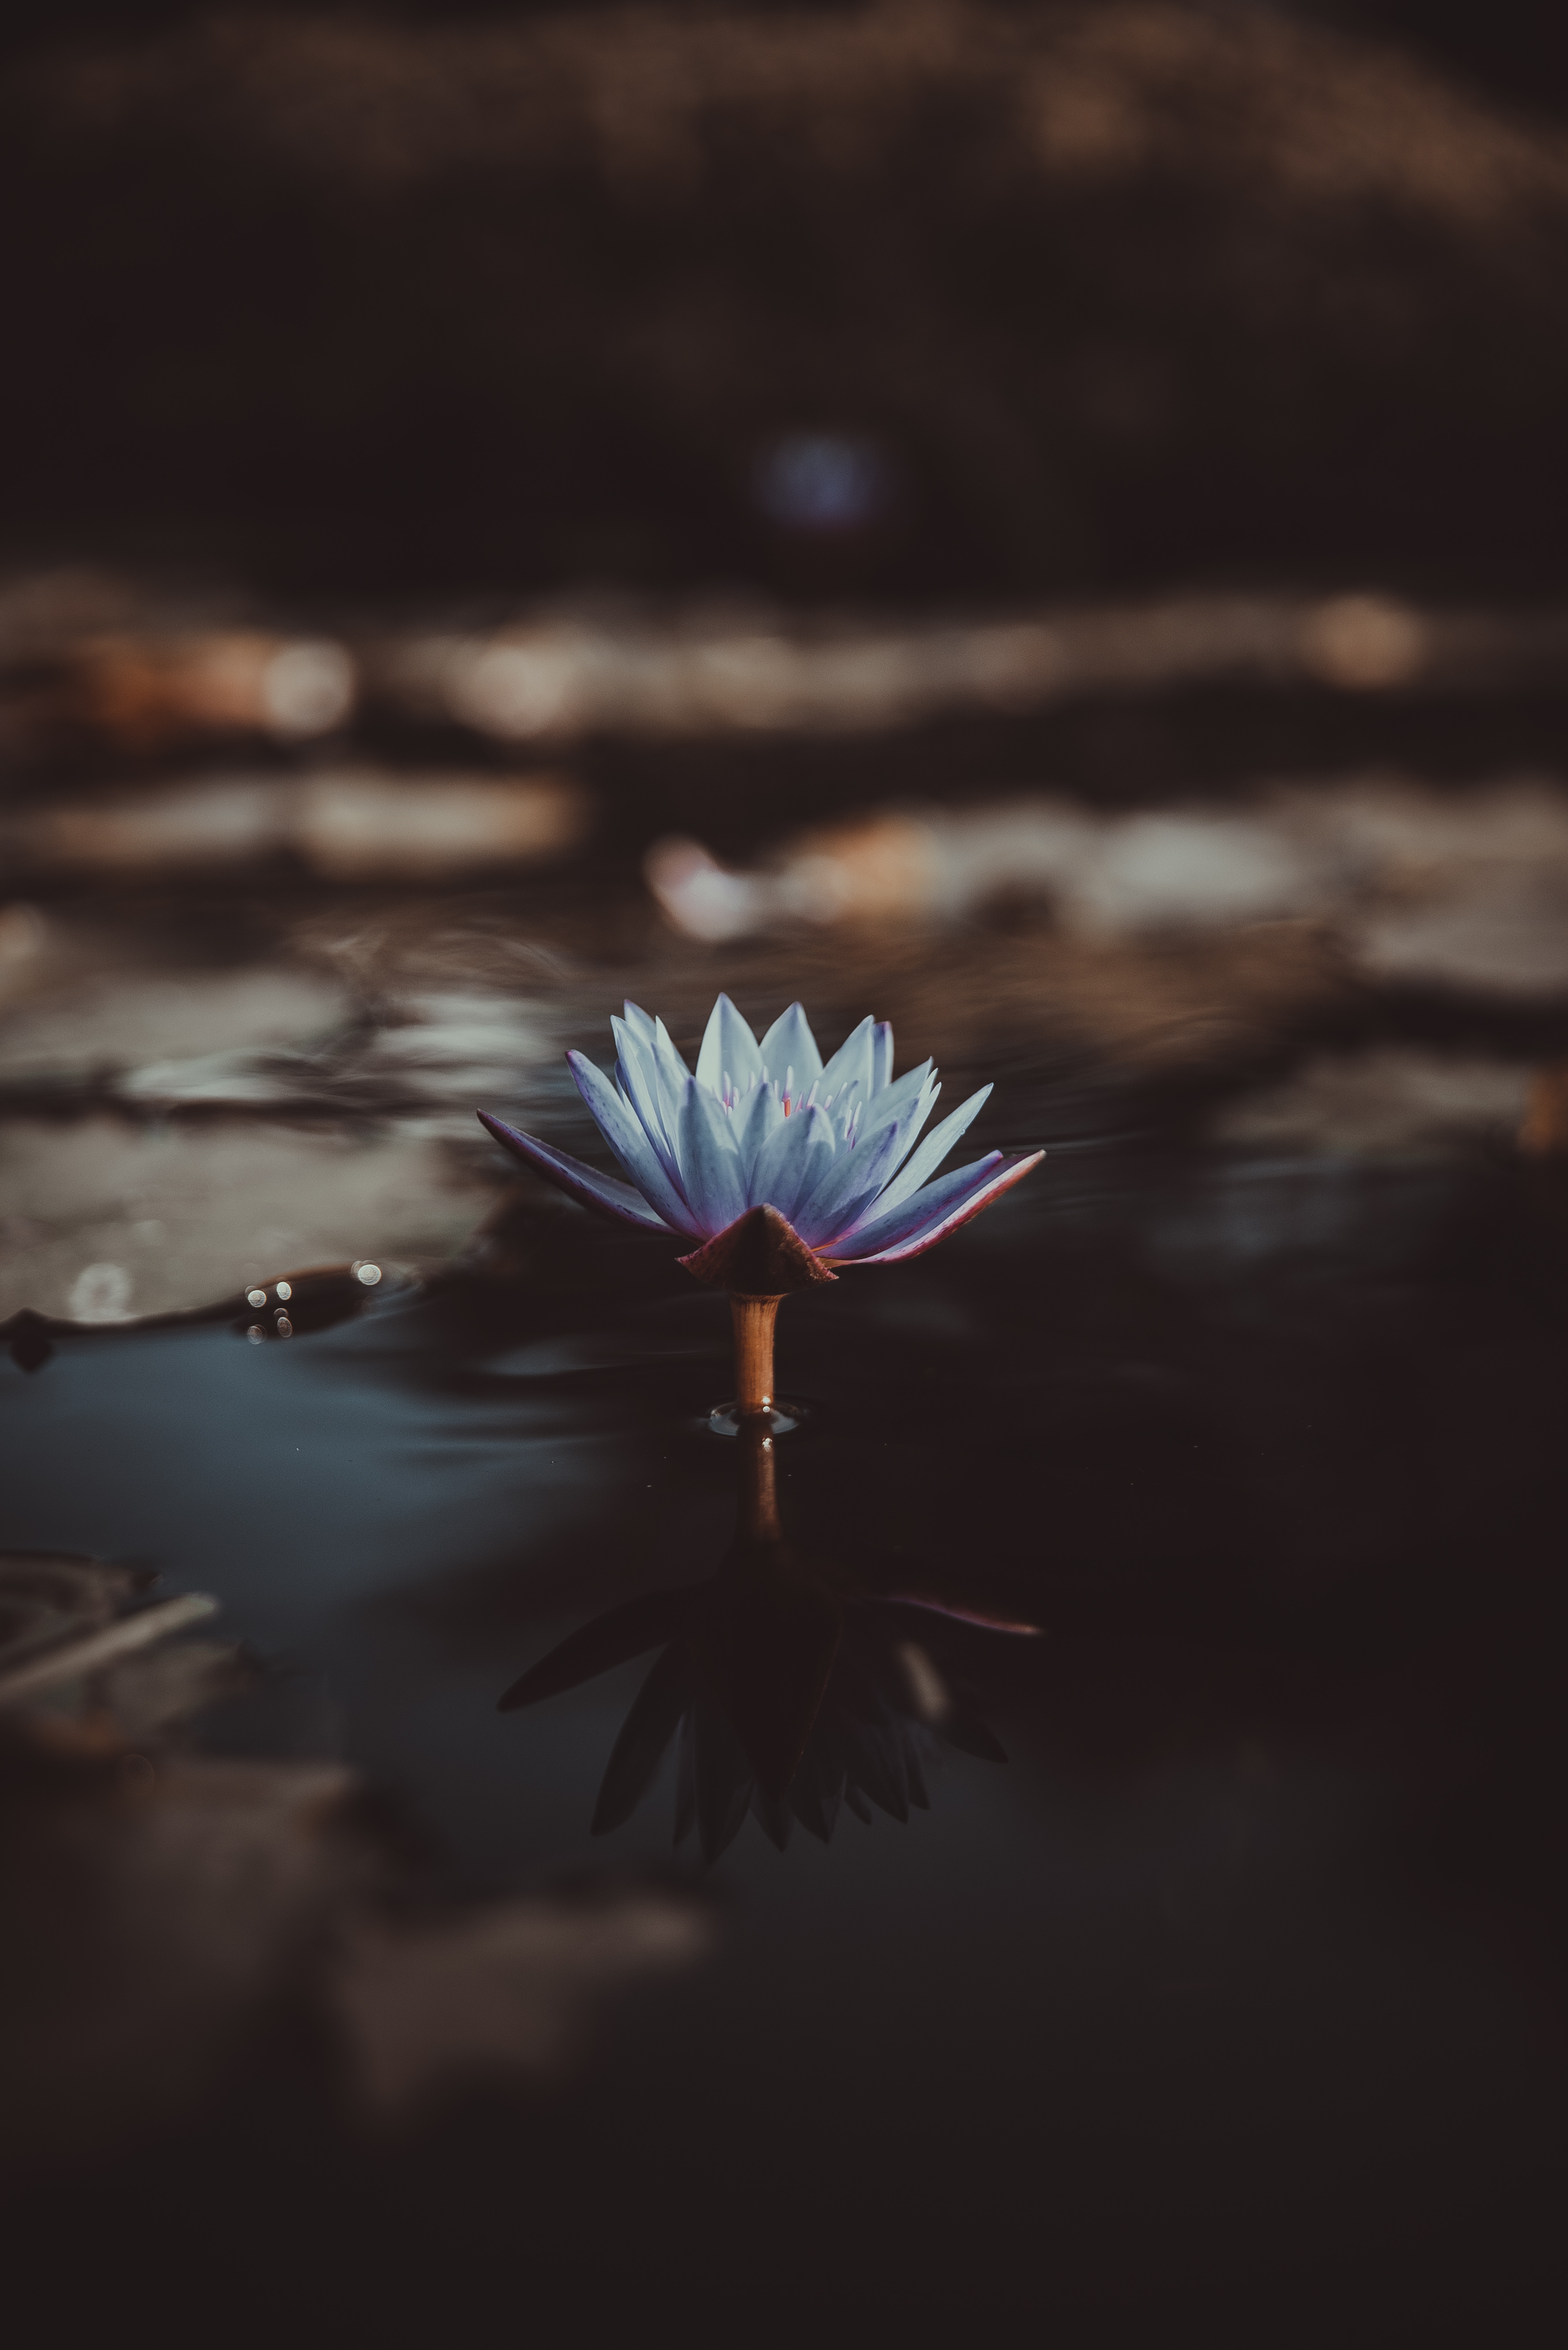 water lily, water, flower, flowers, blur, smooth, nymphea, nymphe